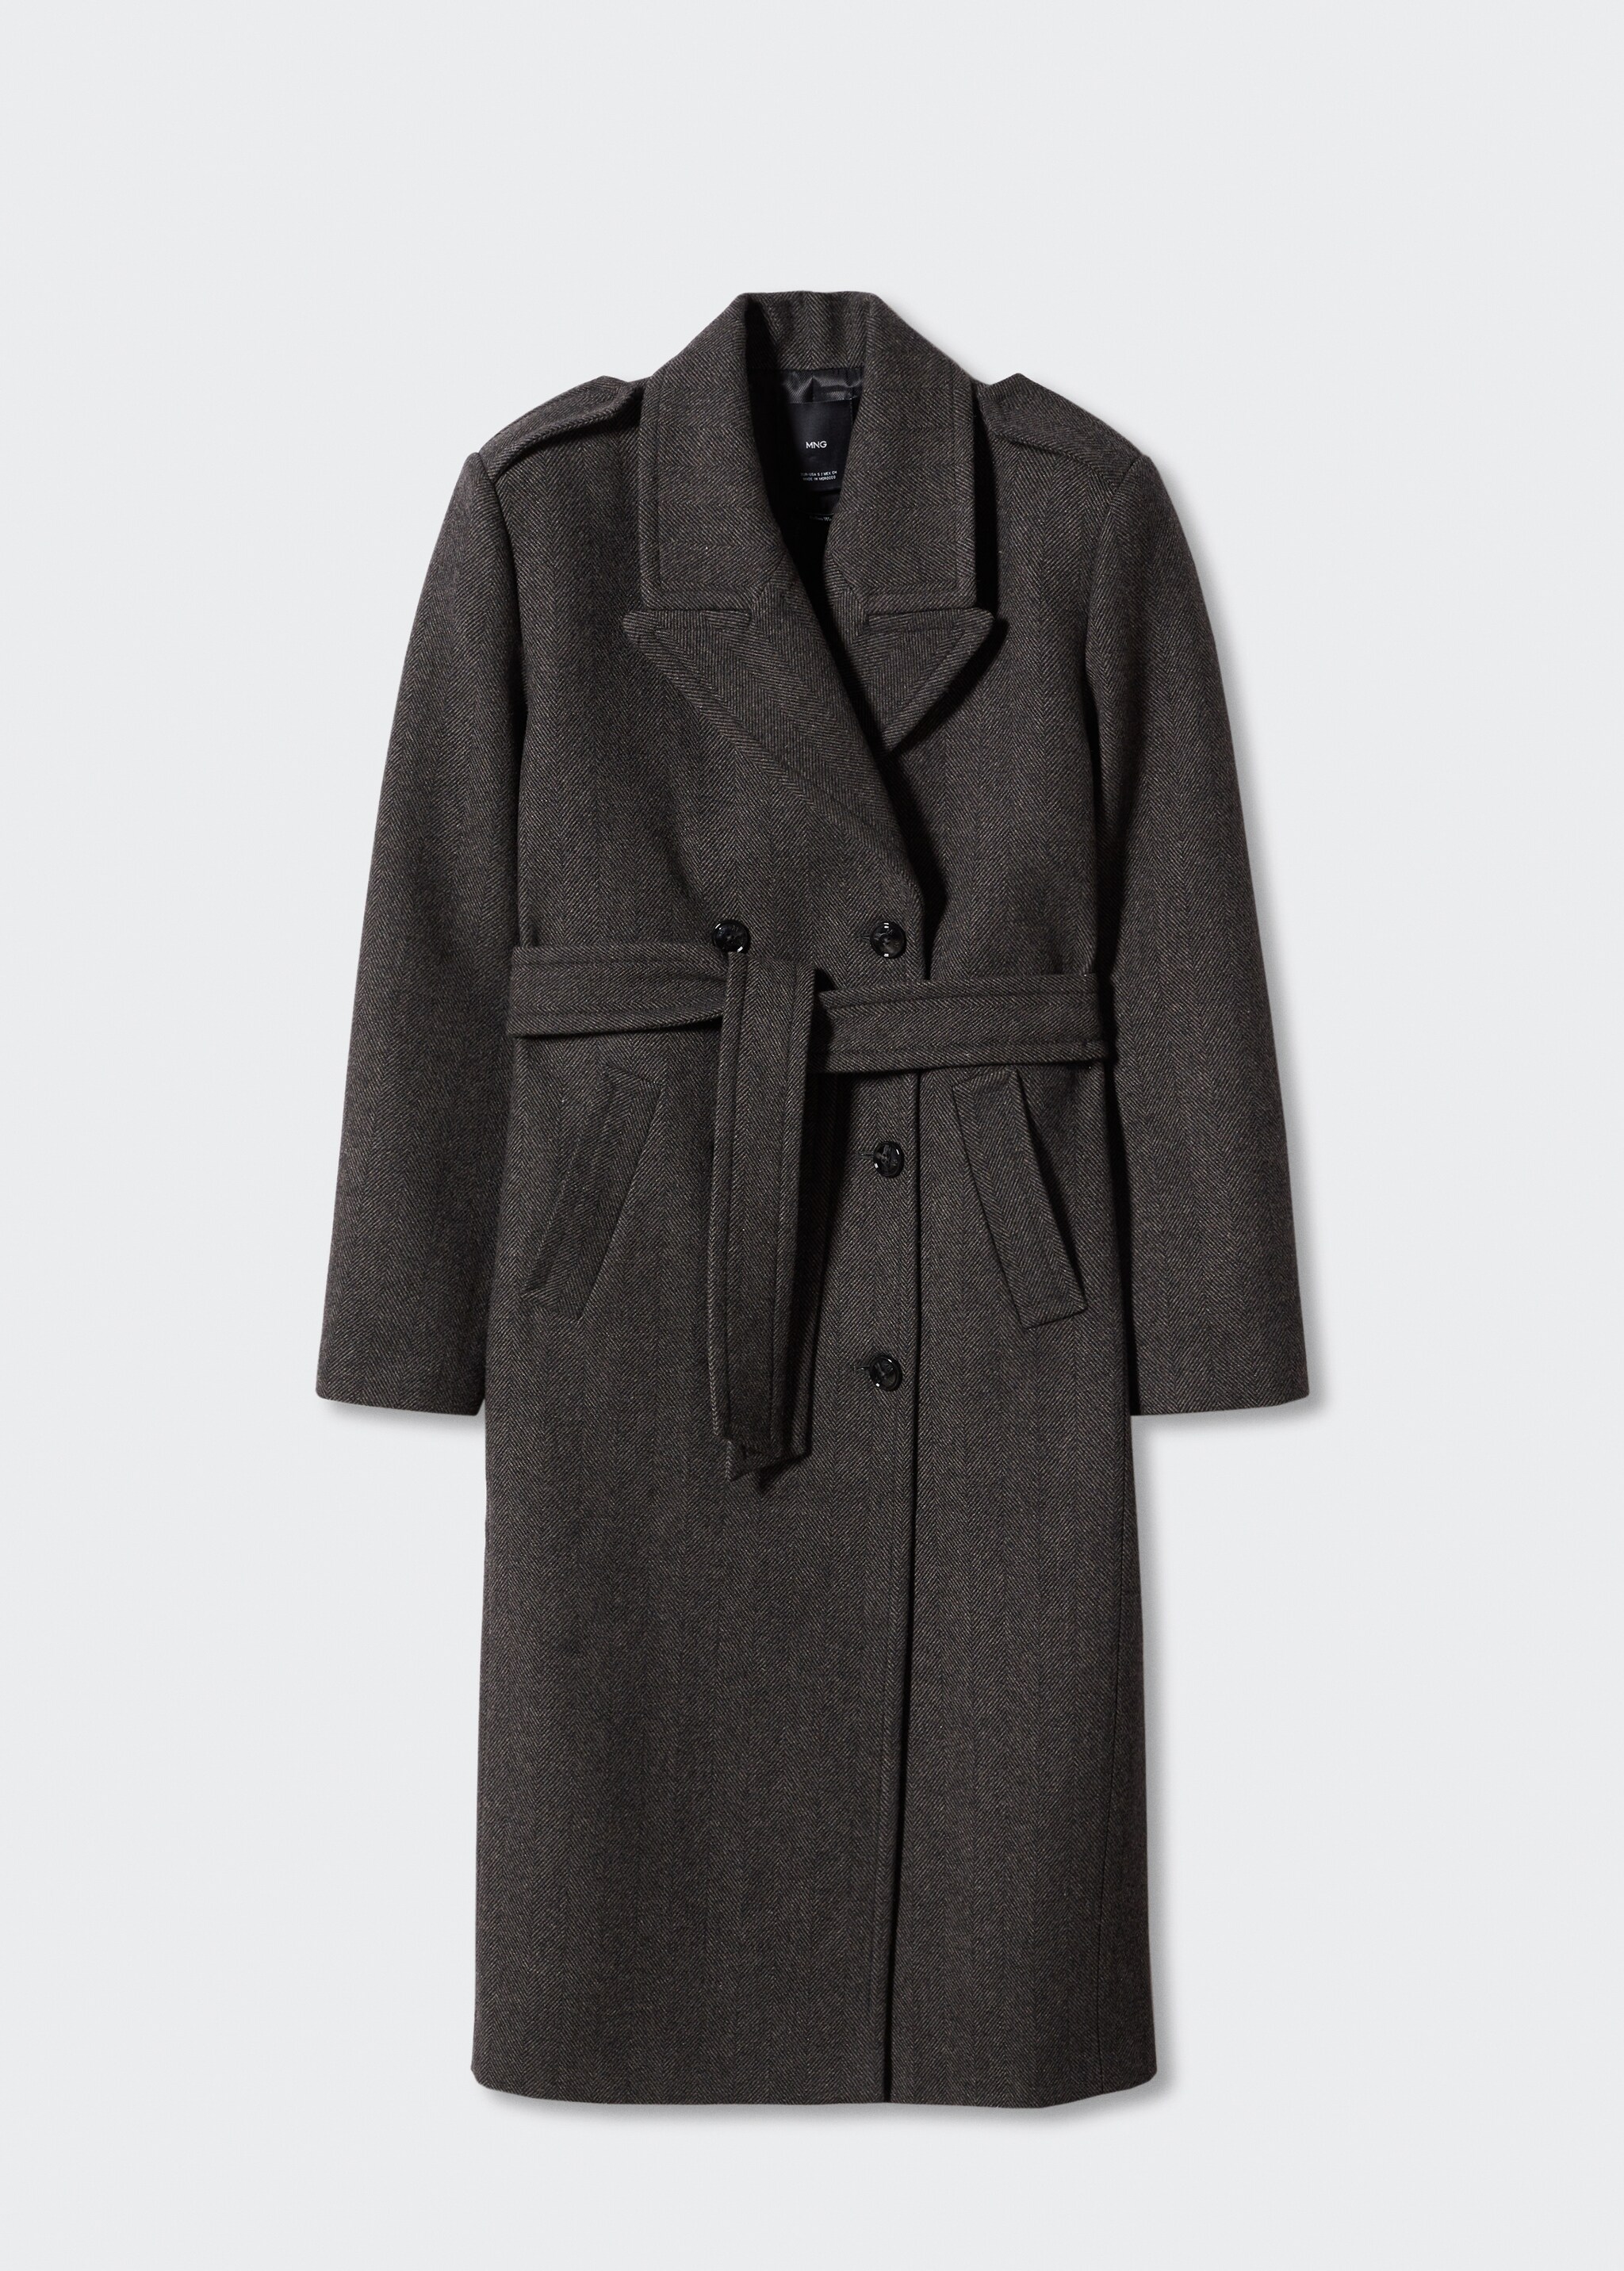 Buttoned wool coat - Article without model